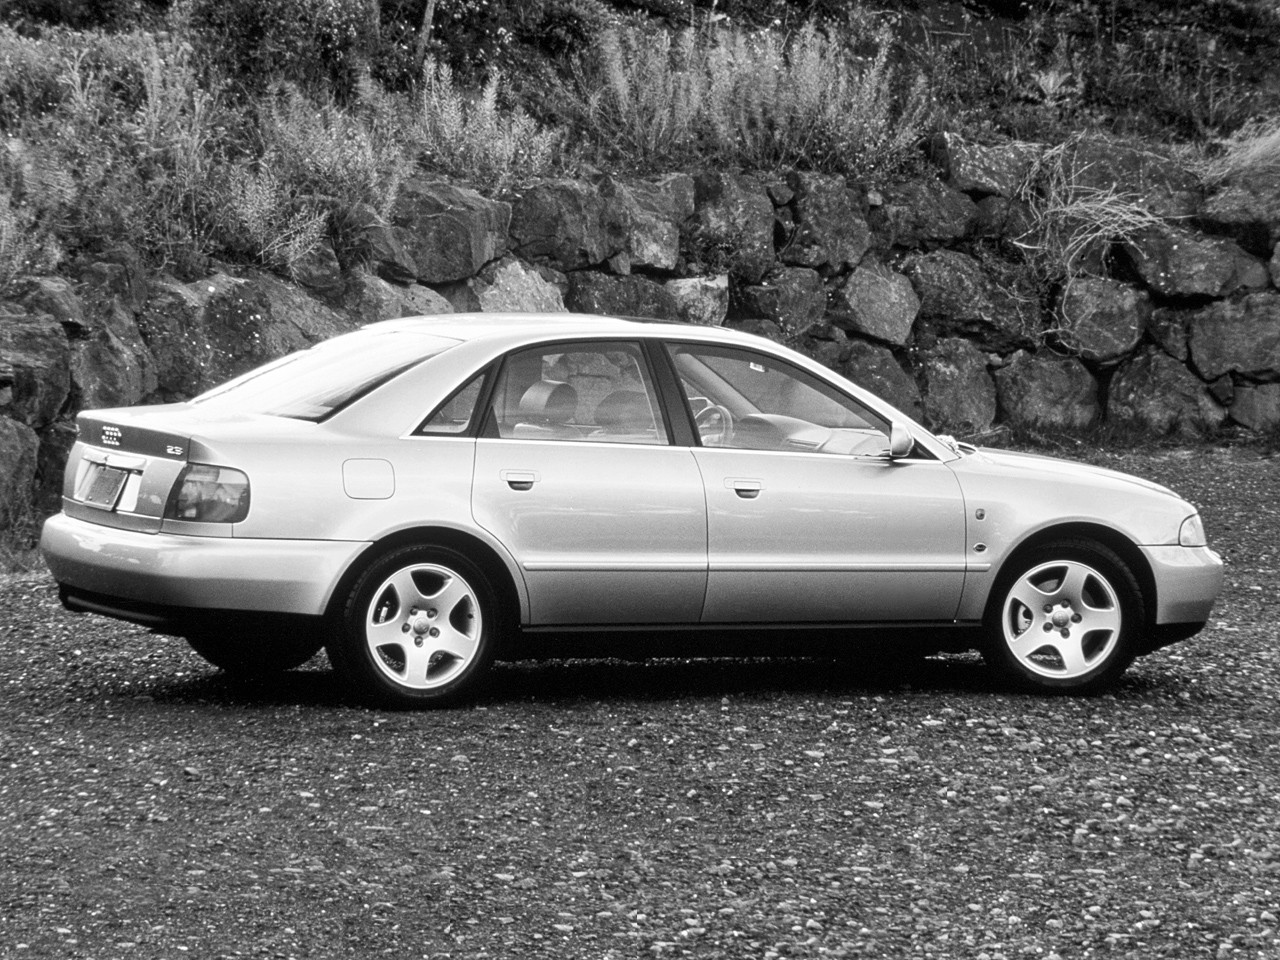 Audi A4 B5 [1994 .. 1999] - Wheel Fitment Data and Specs for Canada